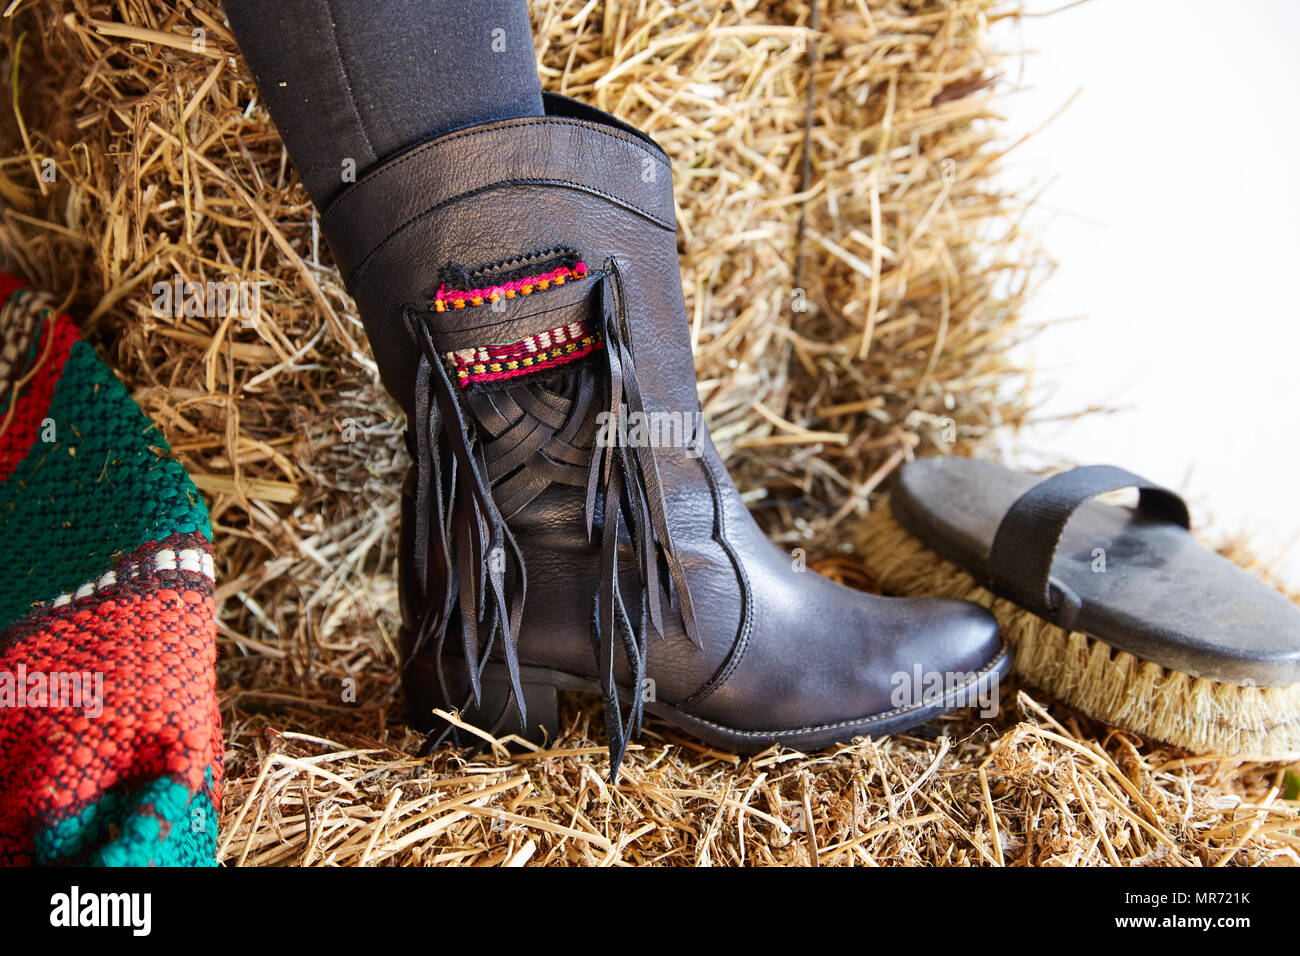 female black boot on stable straw bale with horse brush Stock Photo